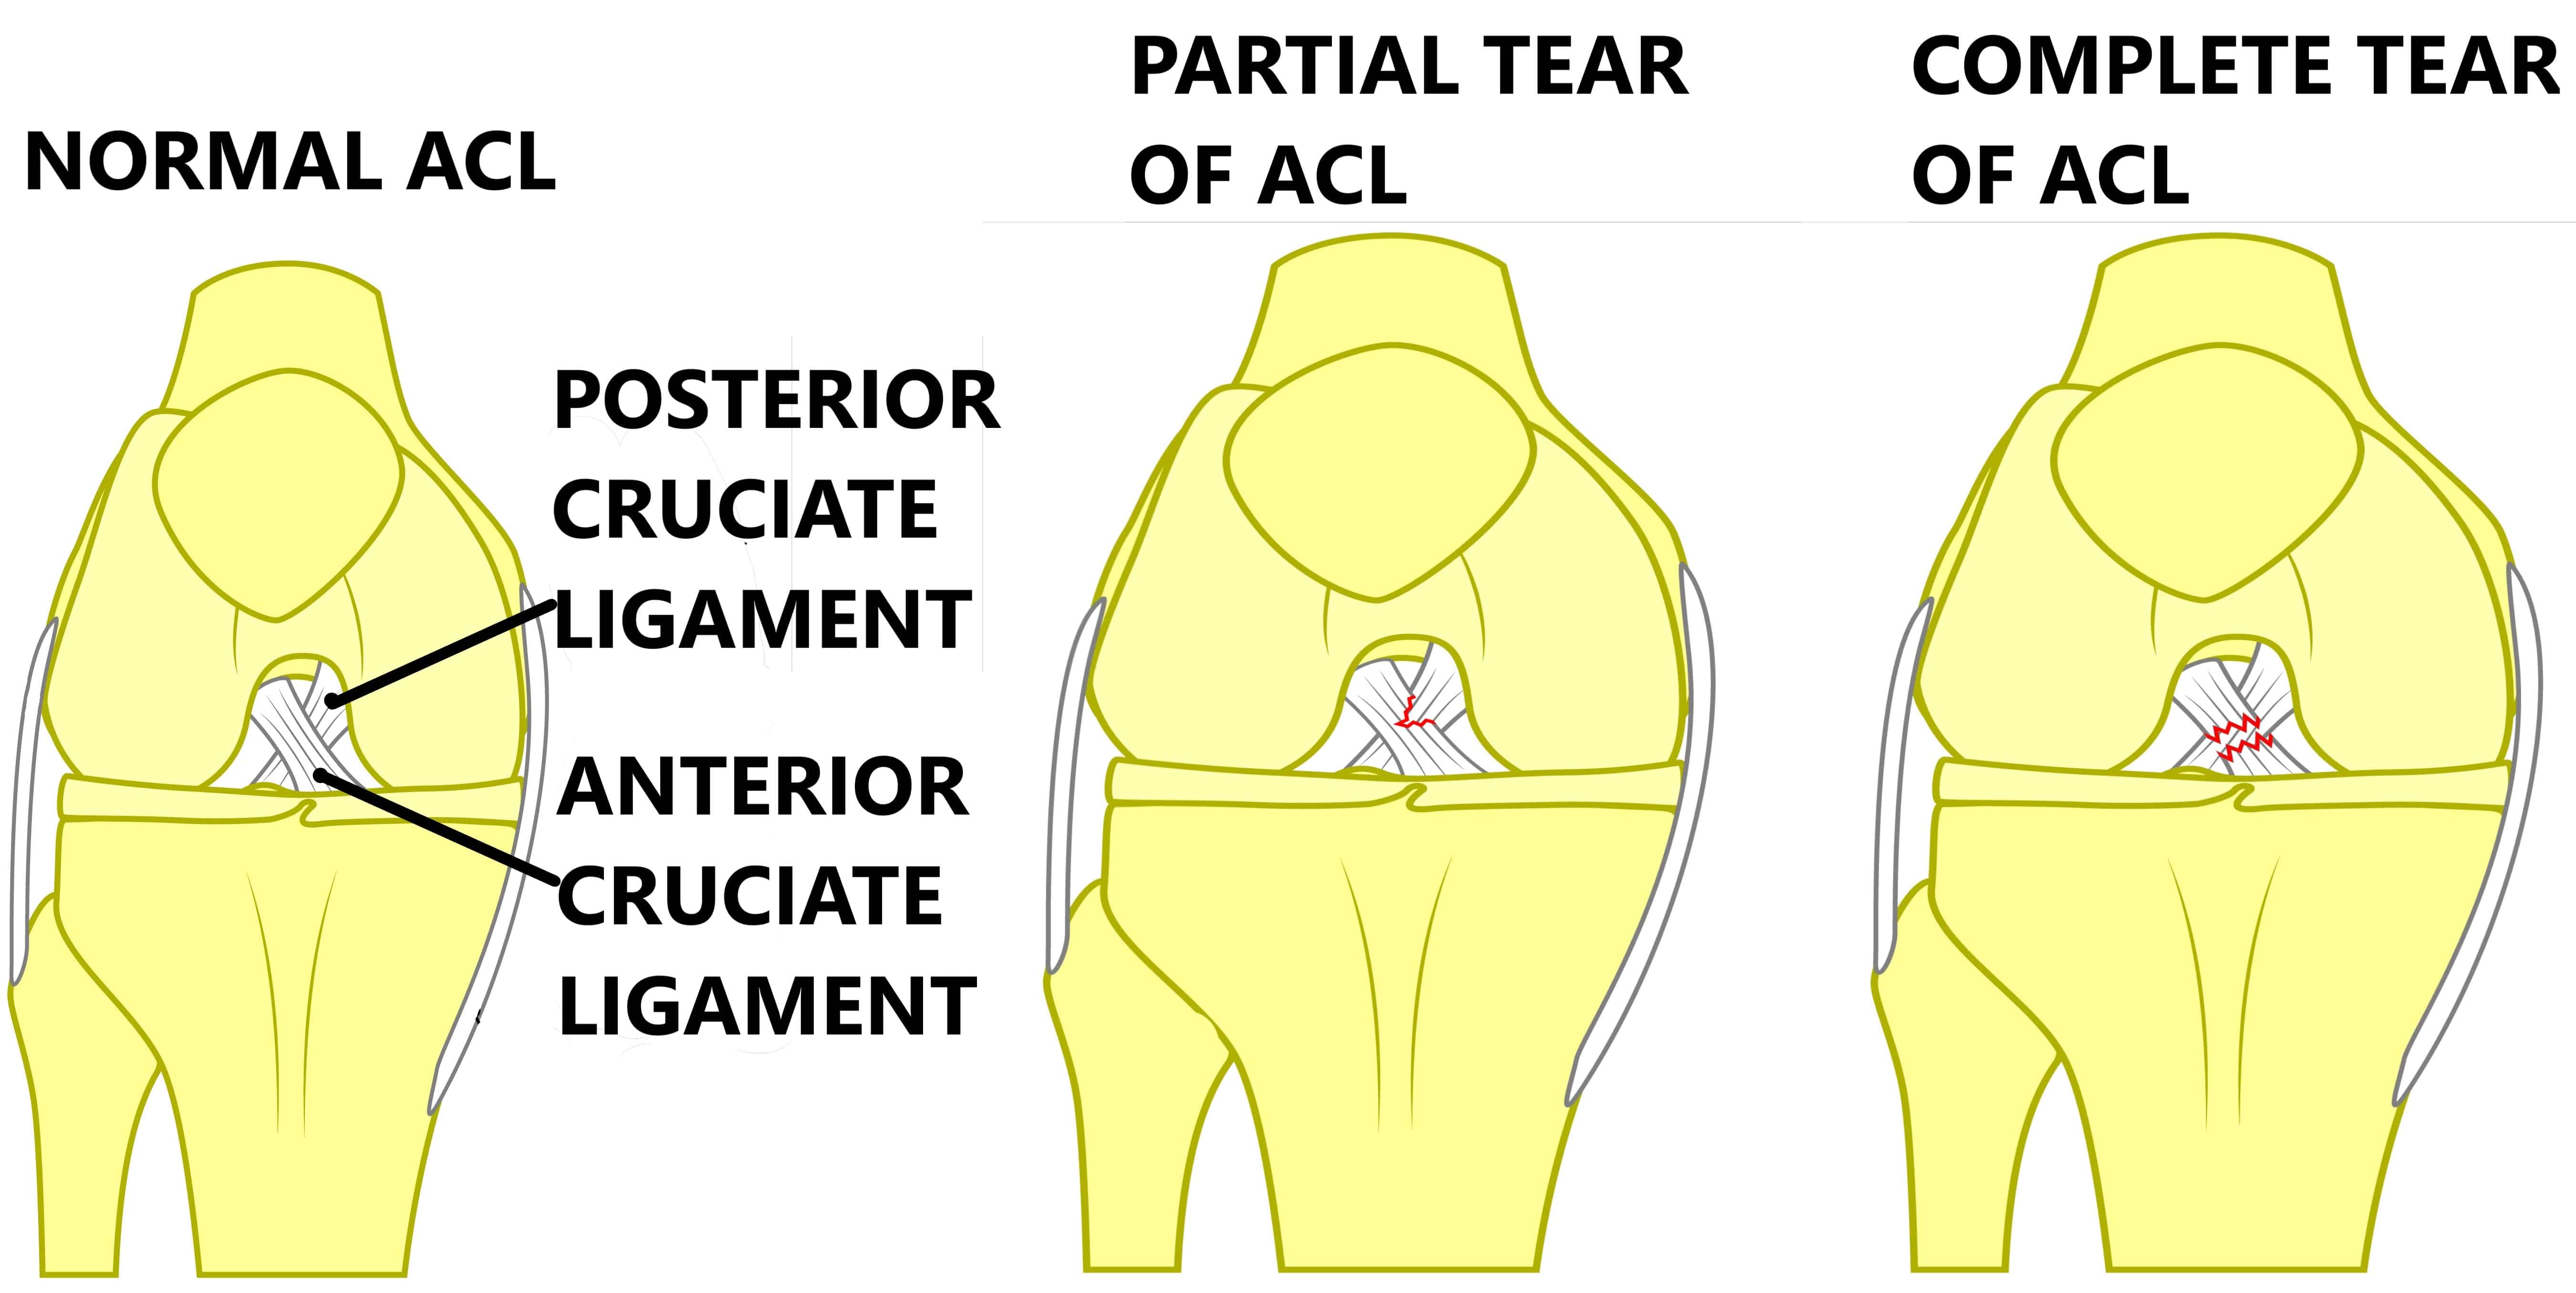 The Benefits of ACL Surgery